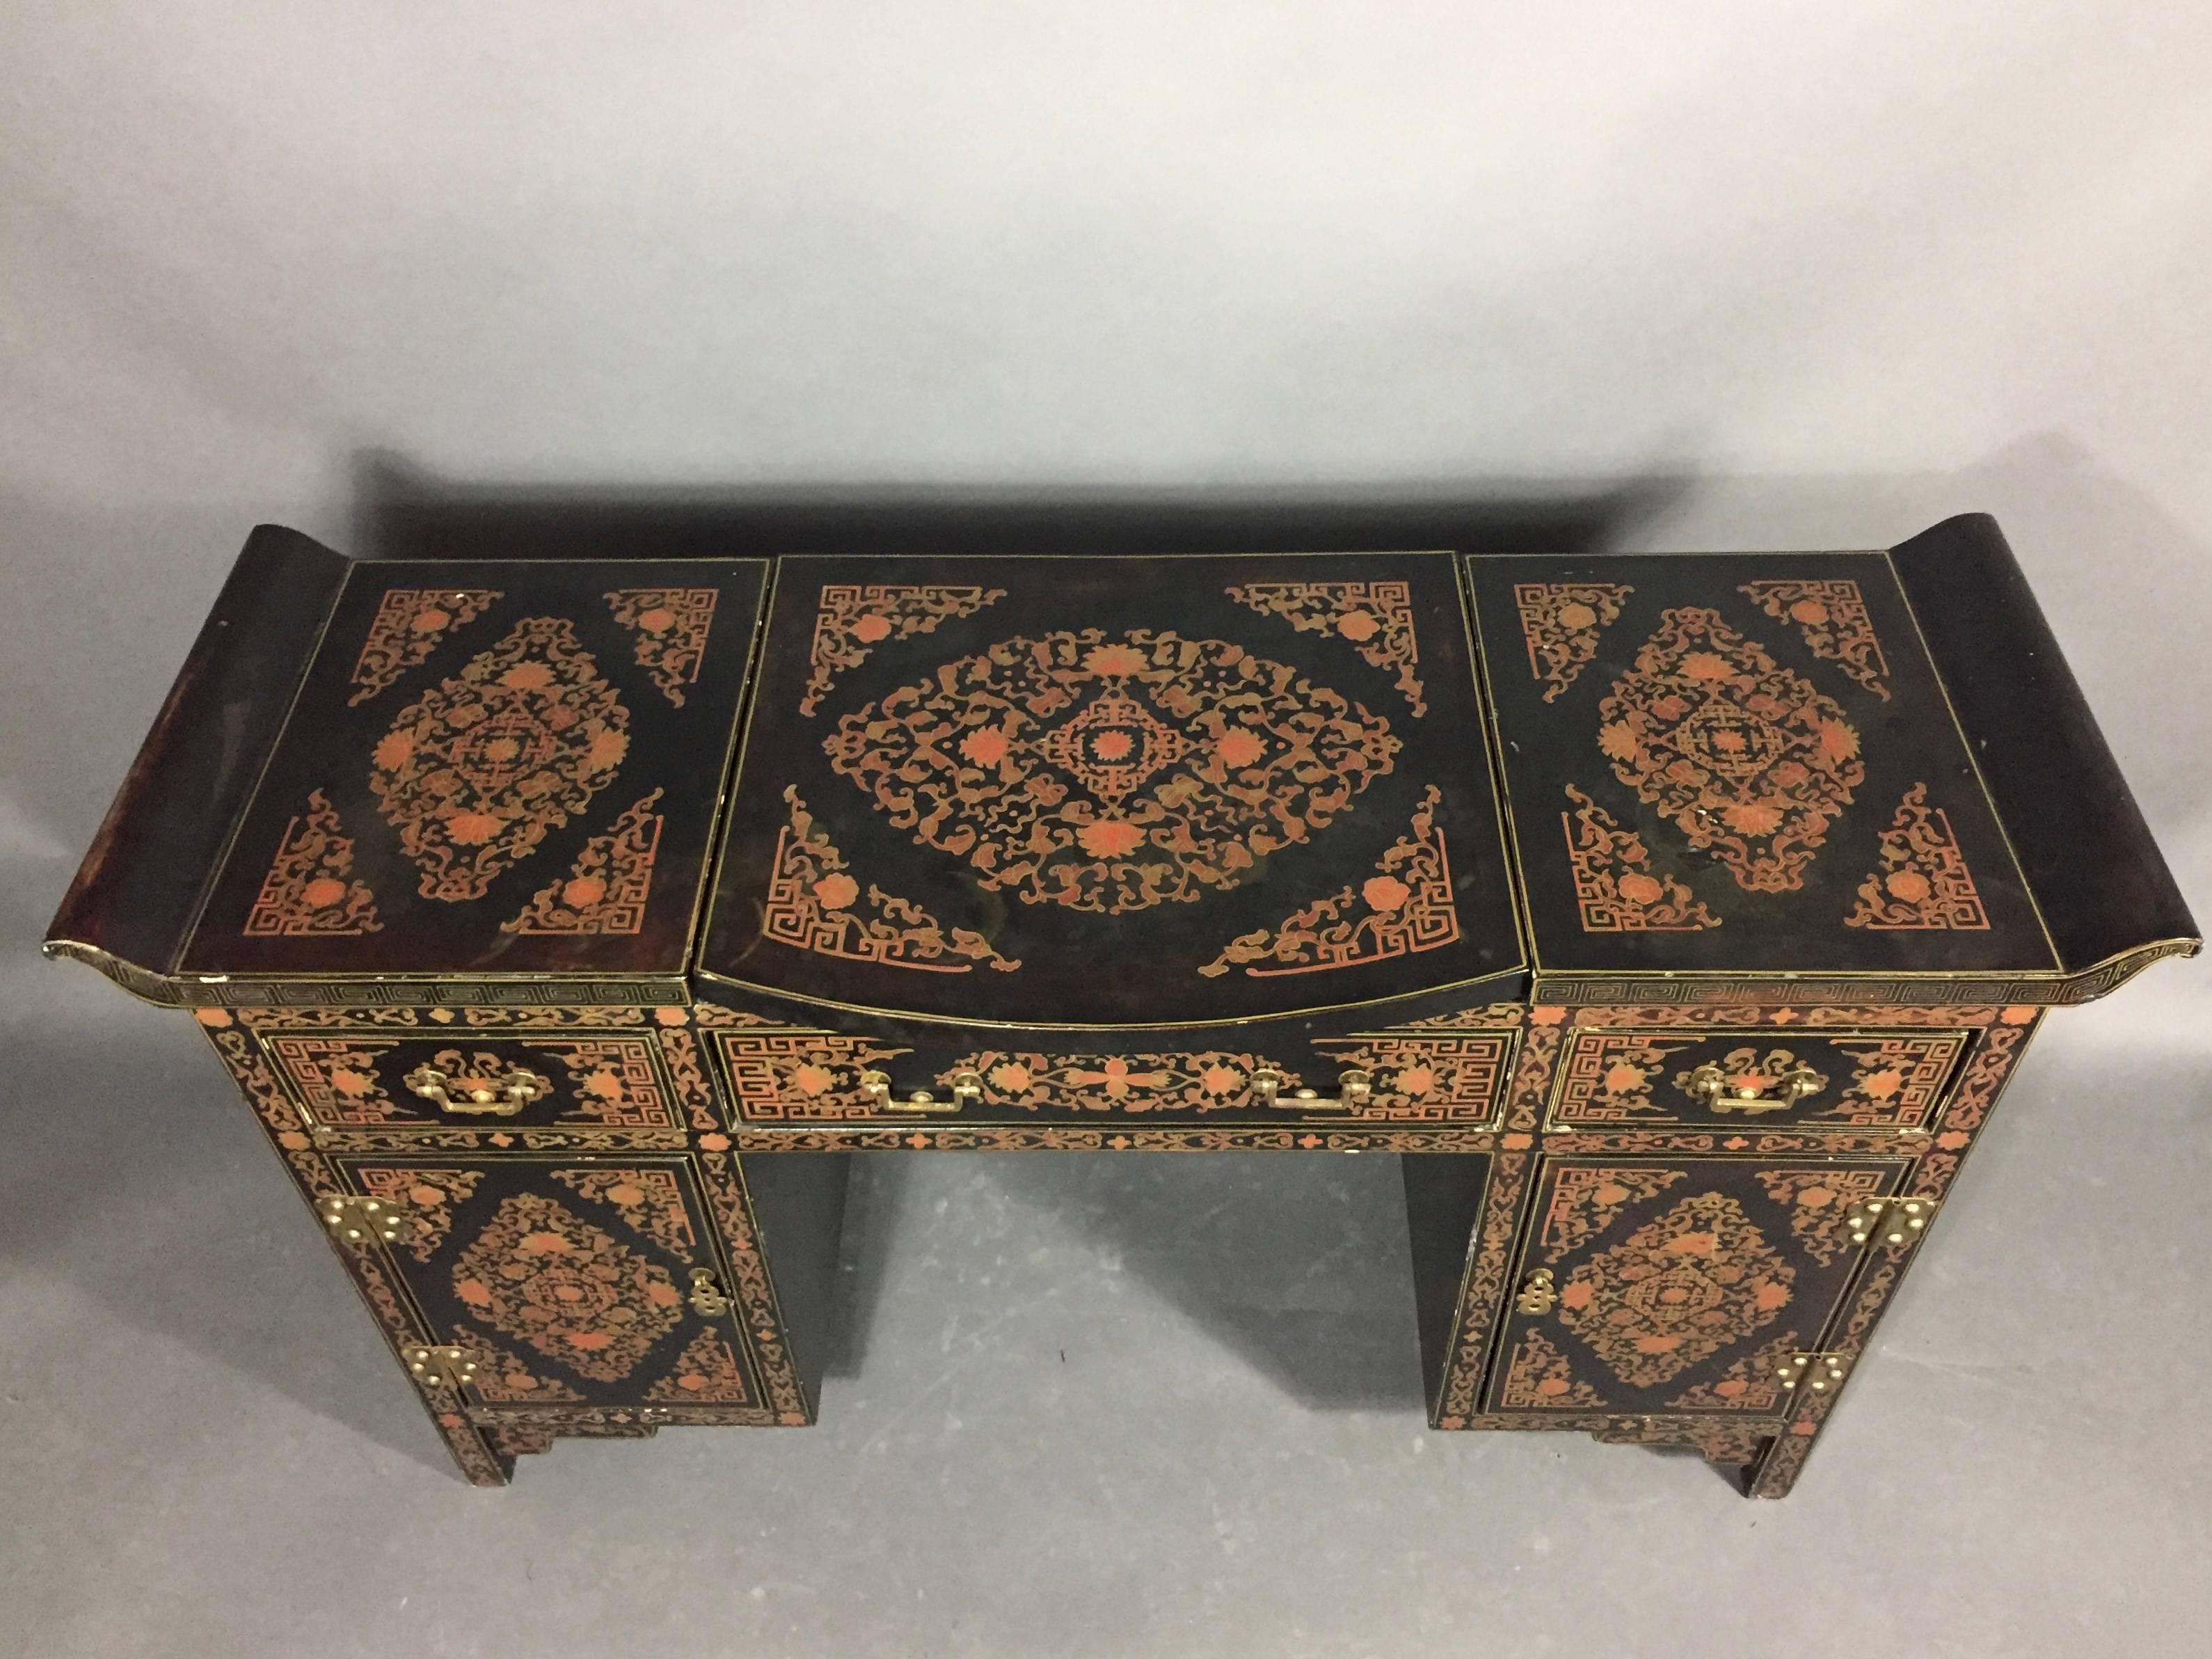 Giltwood 1940s Chinese Export Lacquer Decorated Dressing or Console Table